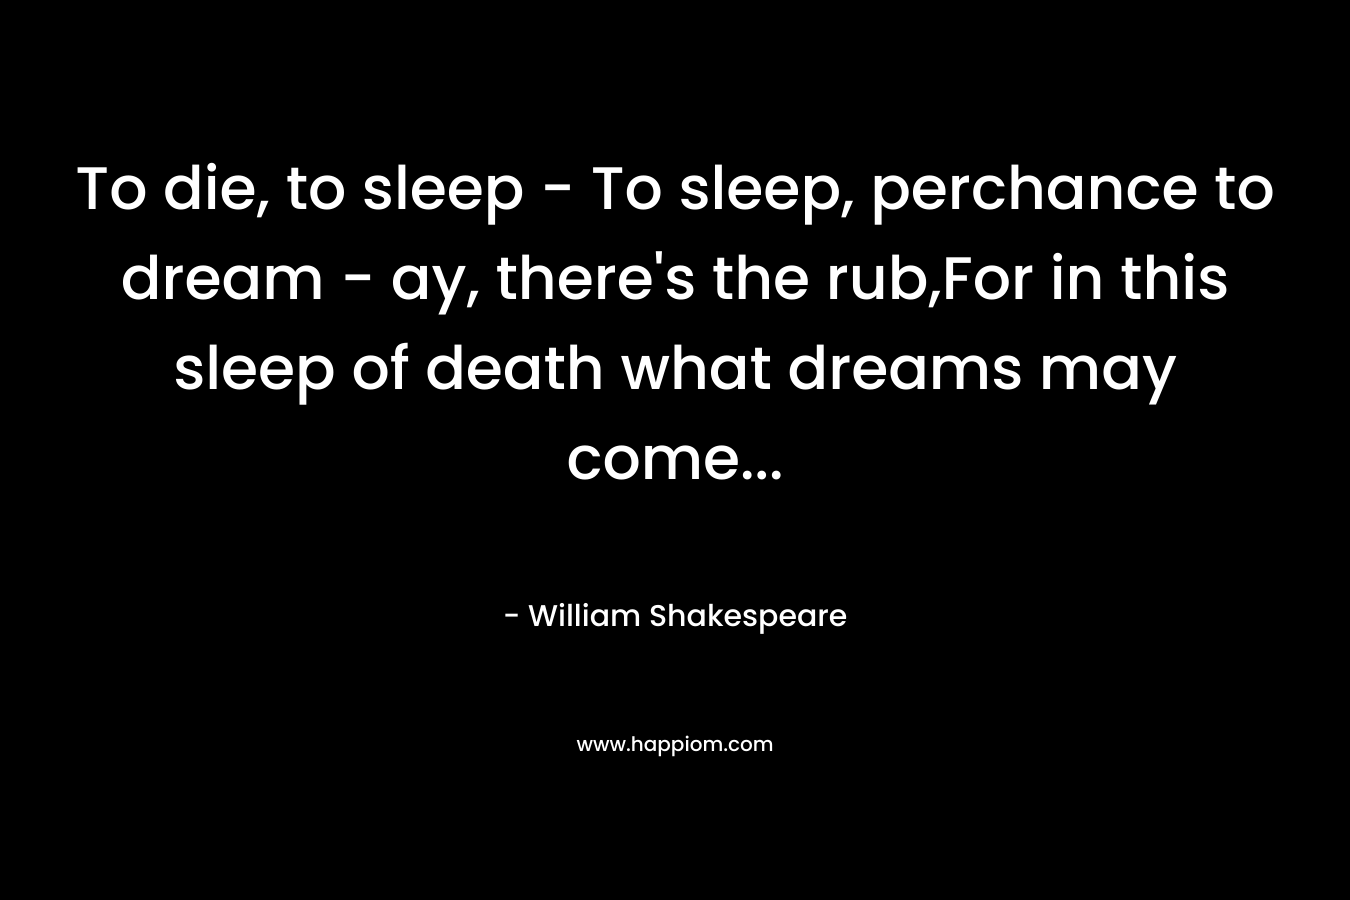 To die, to sleep - To sleep, perchance to dream - ay, there's the rub,For in this sleep of death what dreams may come...